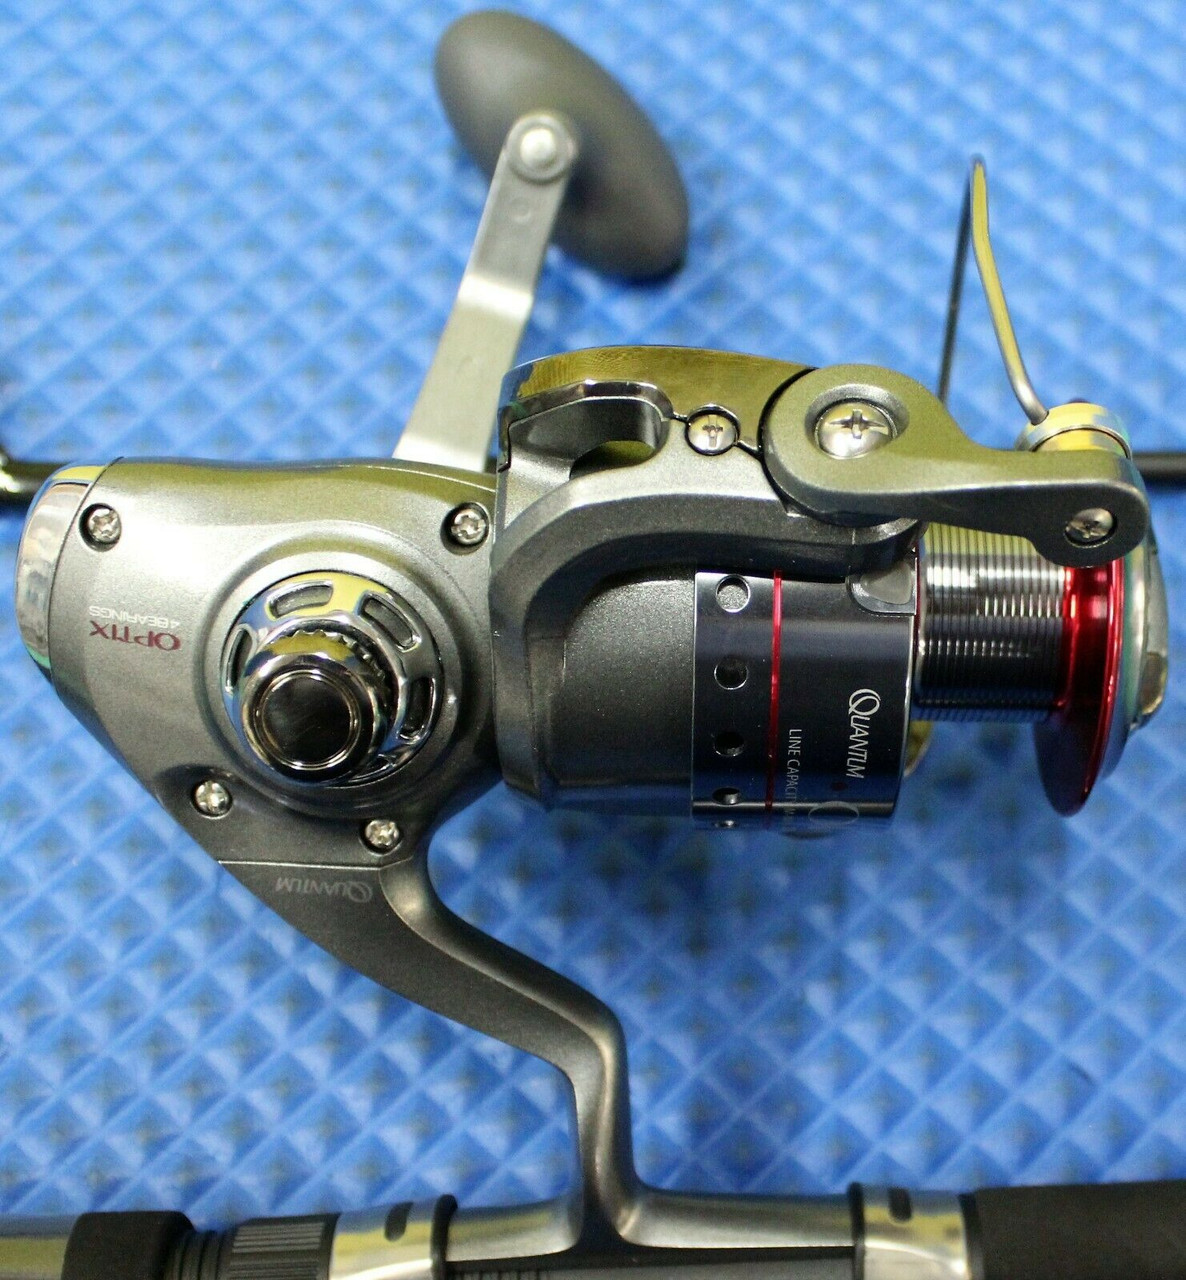 Zebco Stinger Spinning Fishing Reel, Ball Bearing Drive with